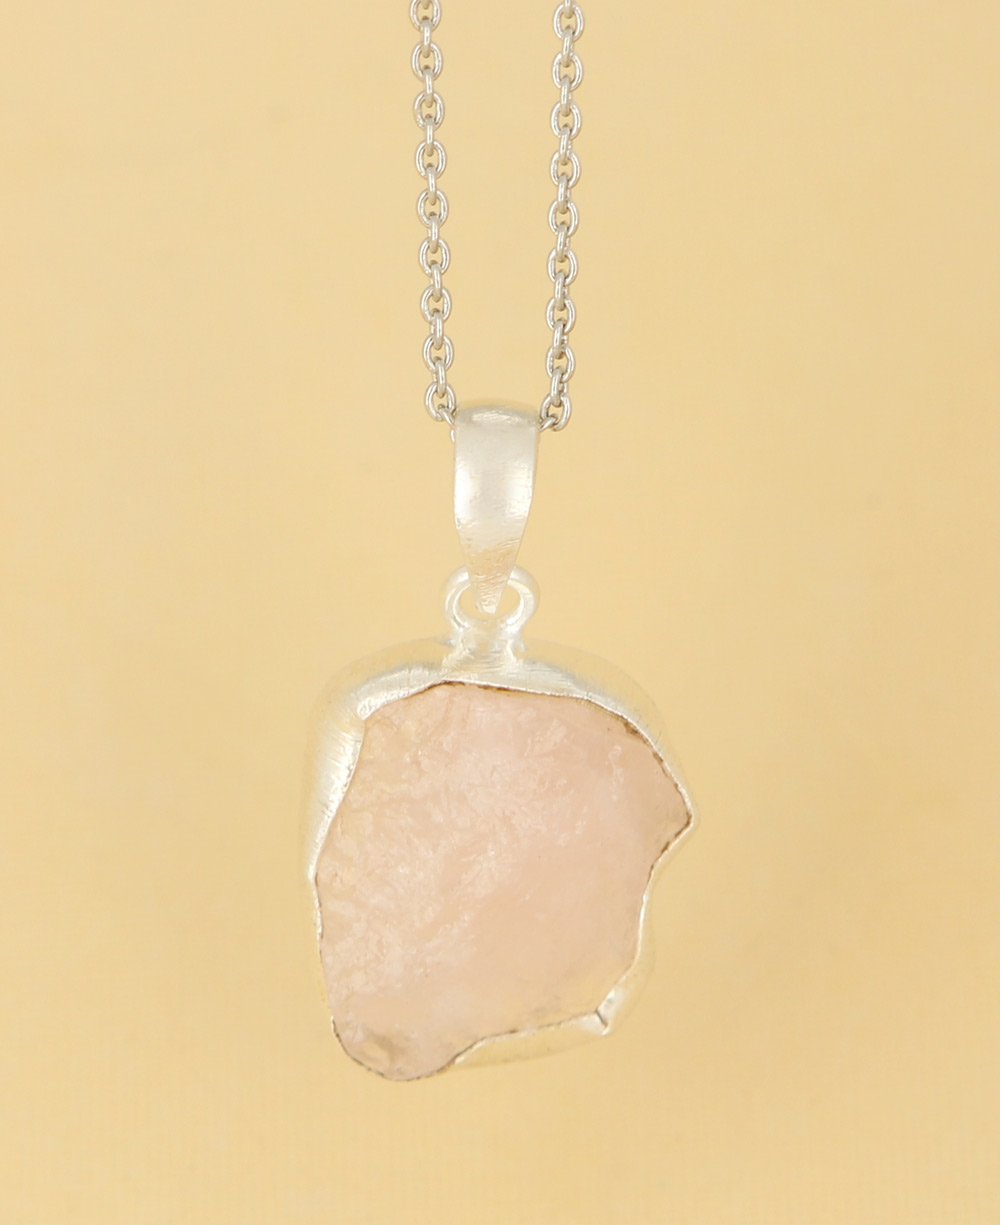 Sterling Silver and Raw Cut Rose Quartz Crystal Necklace - Necklaces